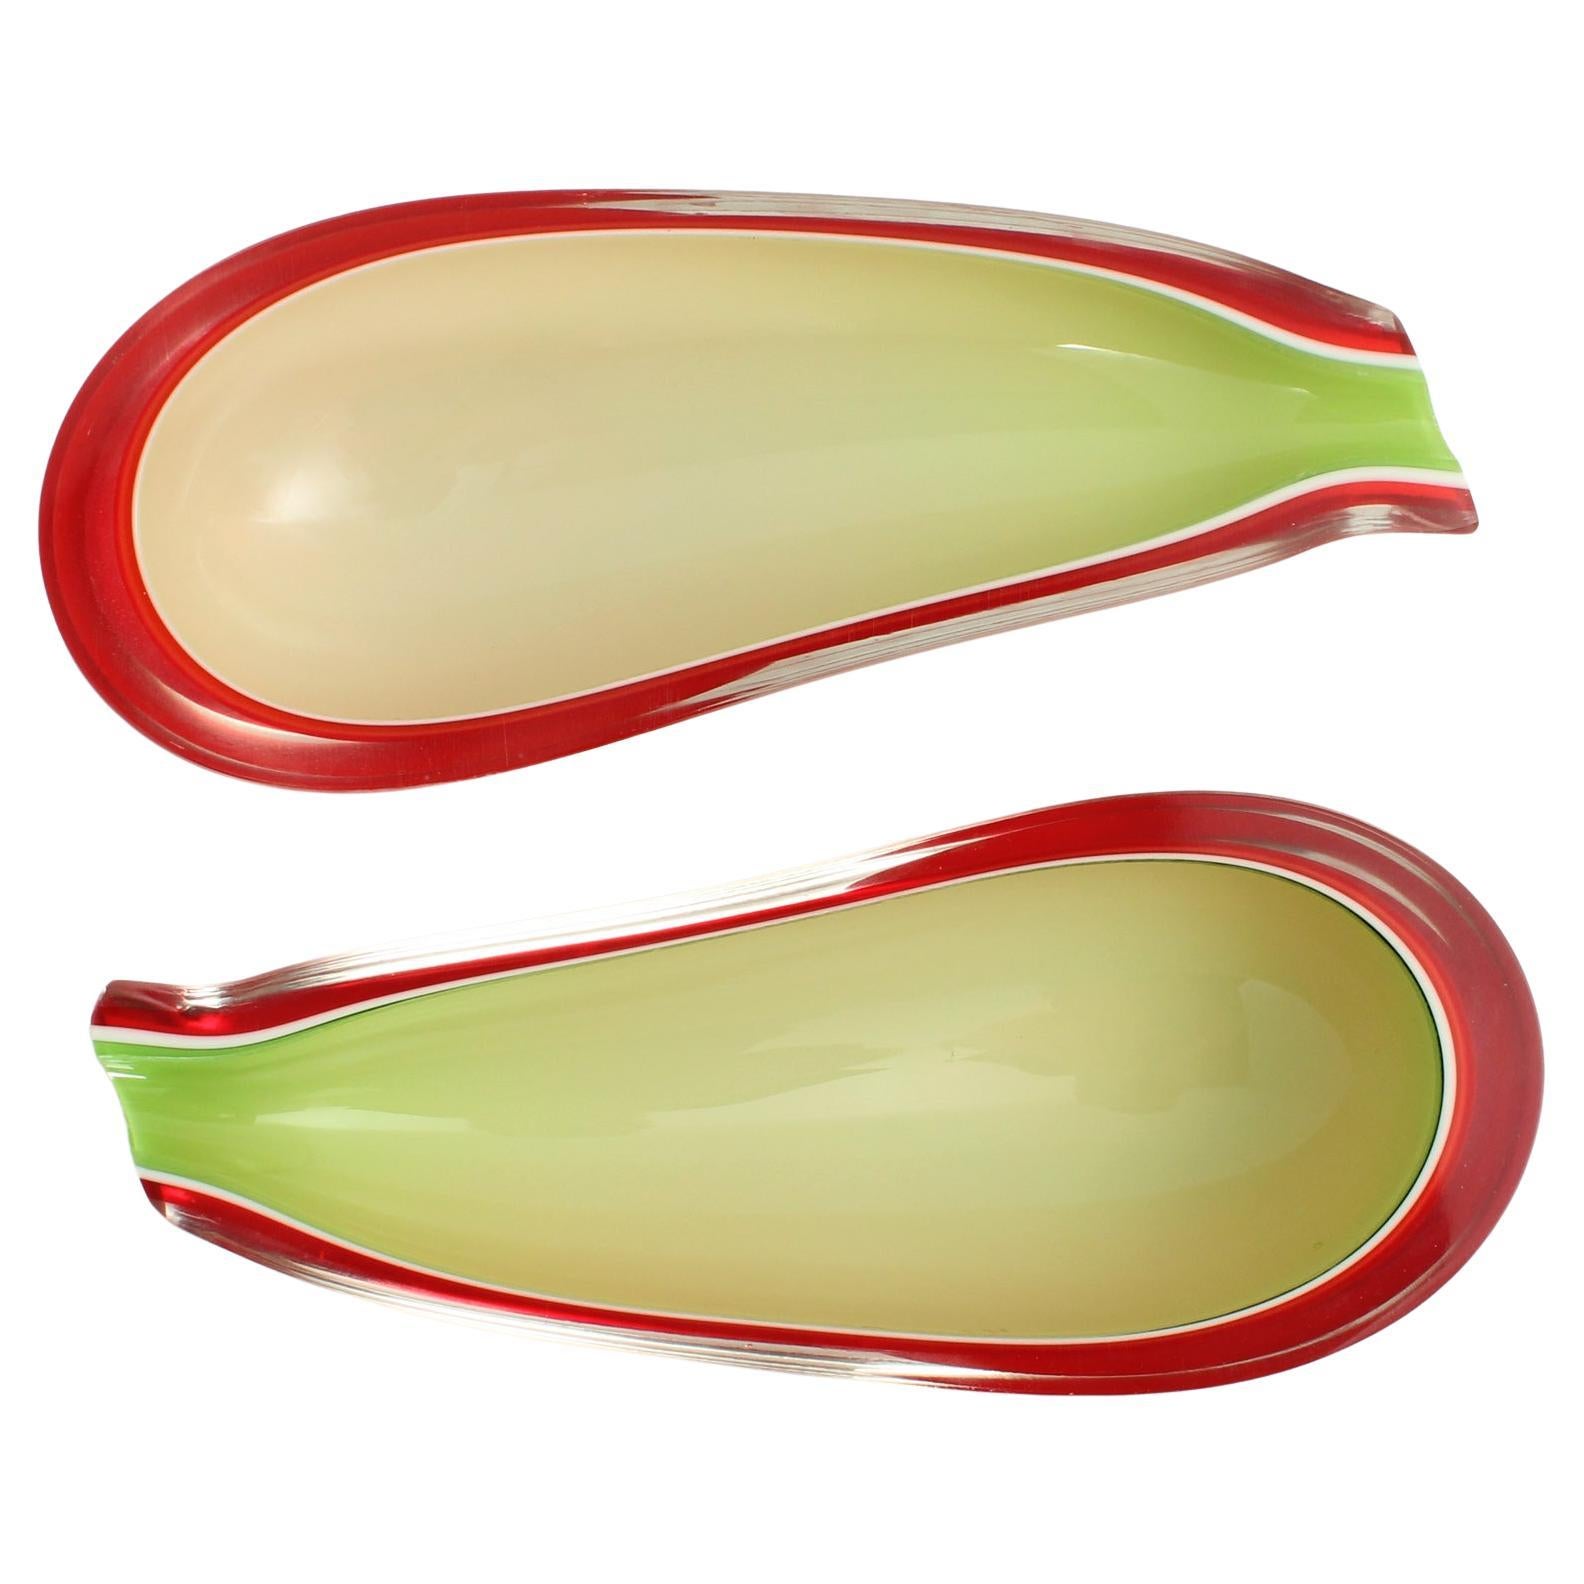 Pair of Fratelli Toso Eggplant Bowls, 1950's For Sale